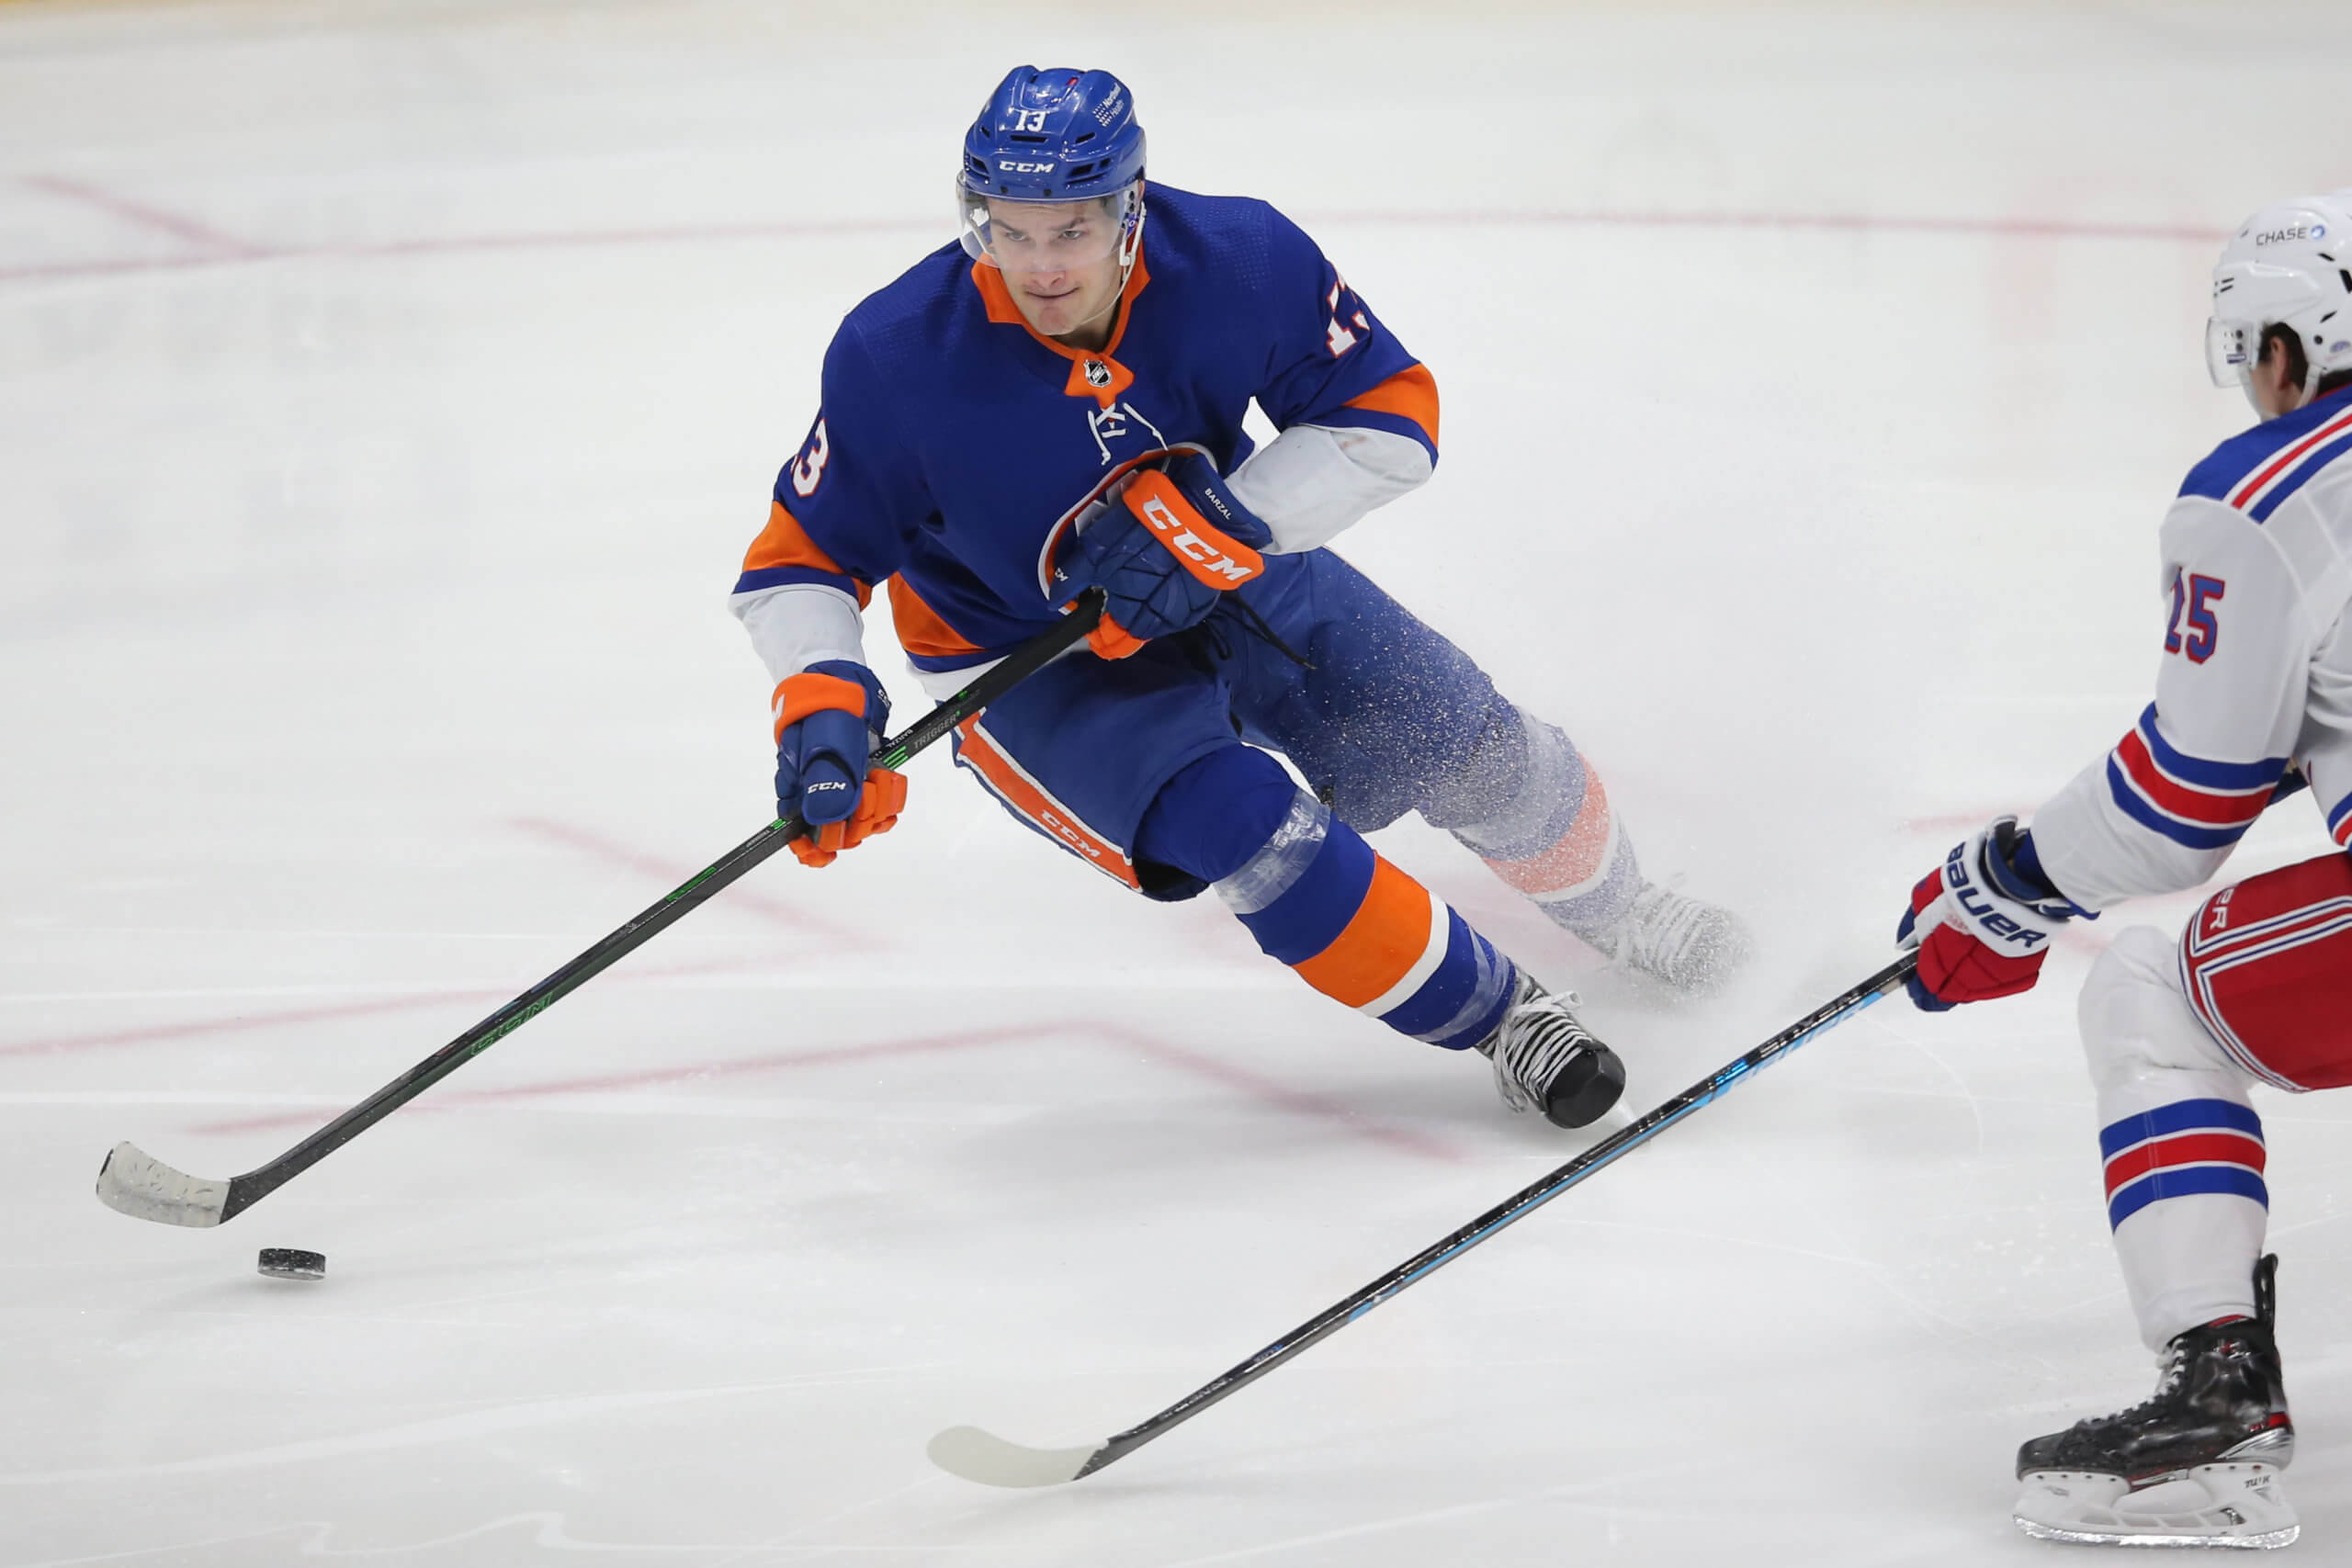 Why Barzal Would Benefit on Wing, QMJHL Head Coach Provides Insight